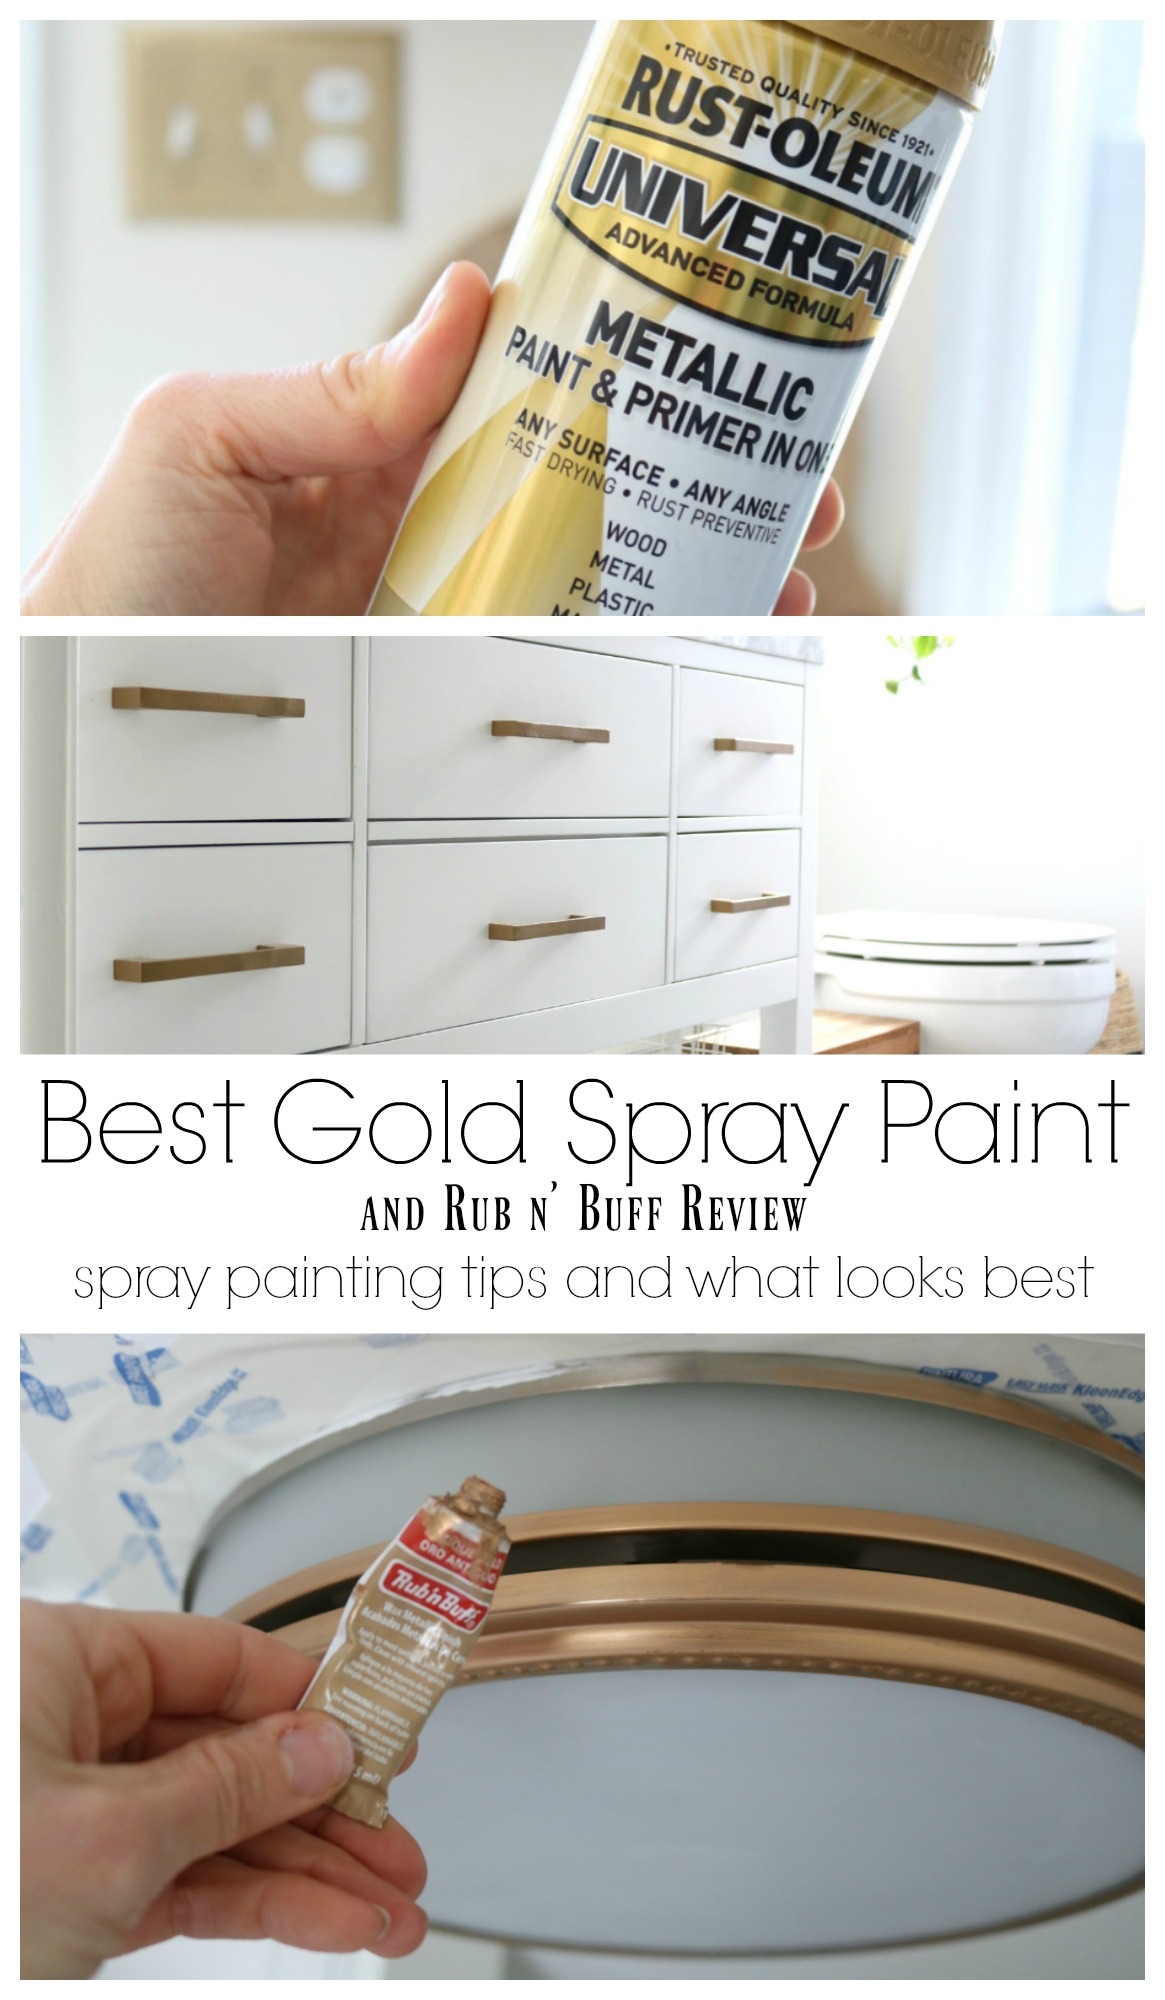 Favorite Spray Paint And Rub N Buff, Best Gold Spray Paint For Cabinet Hardware